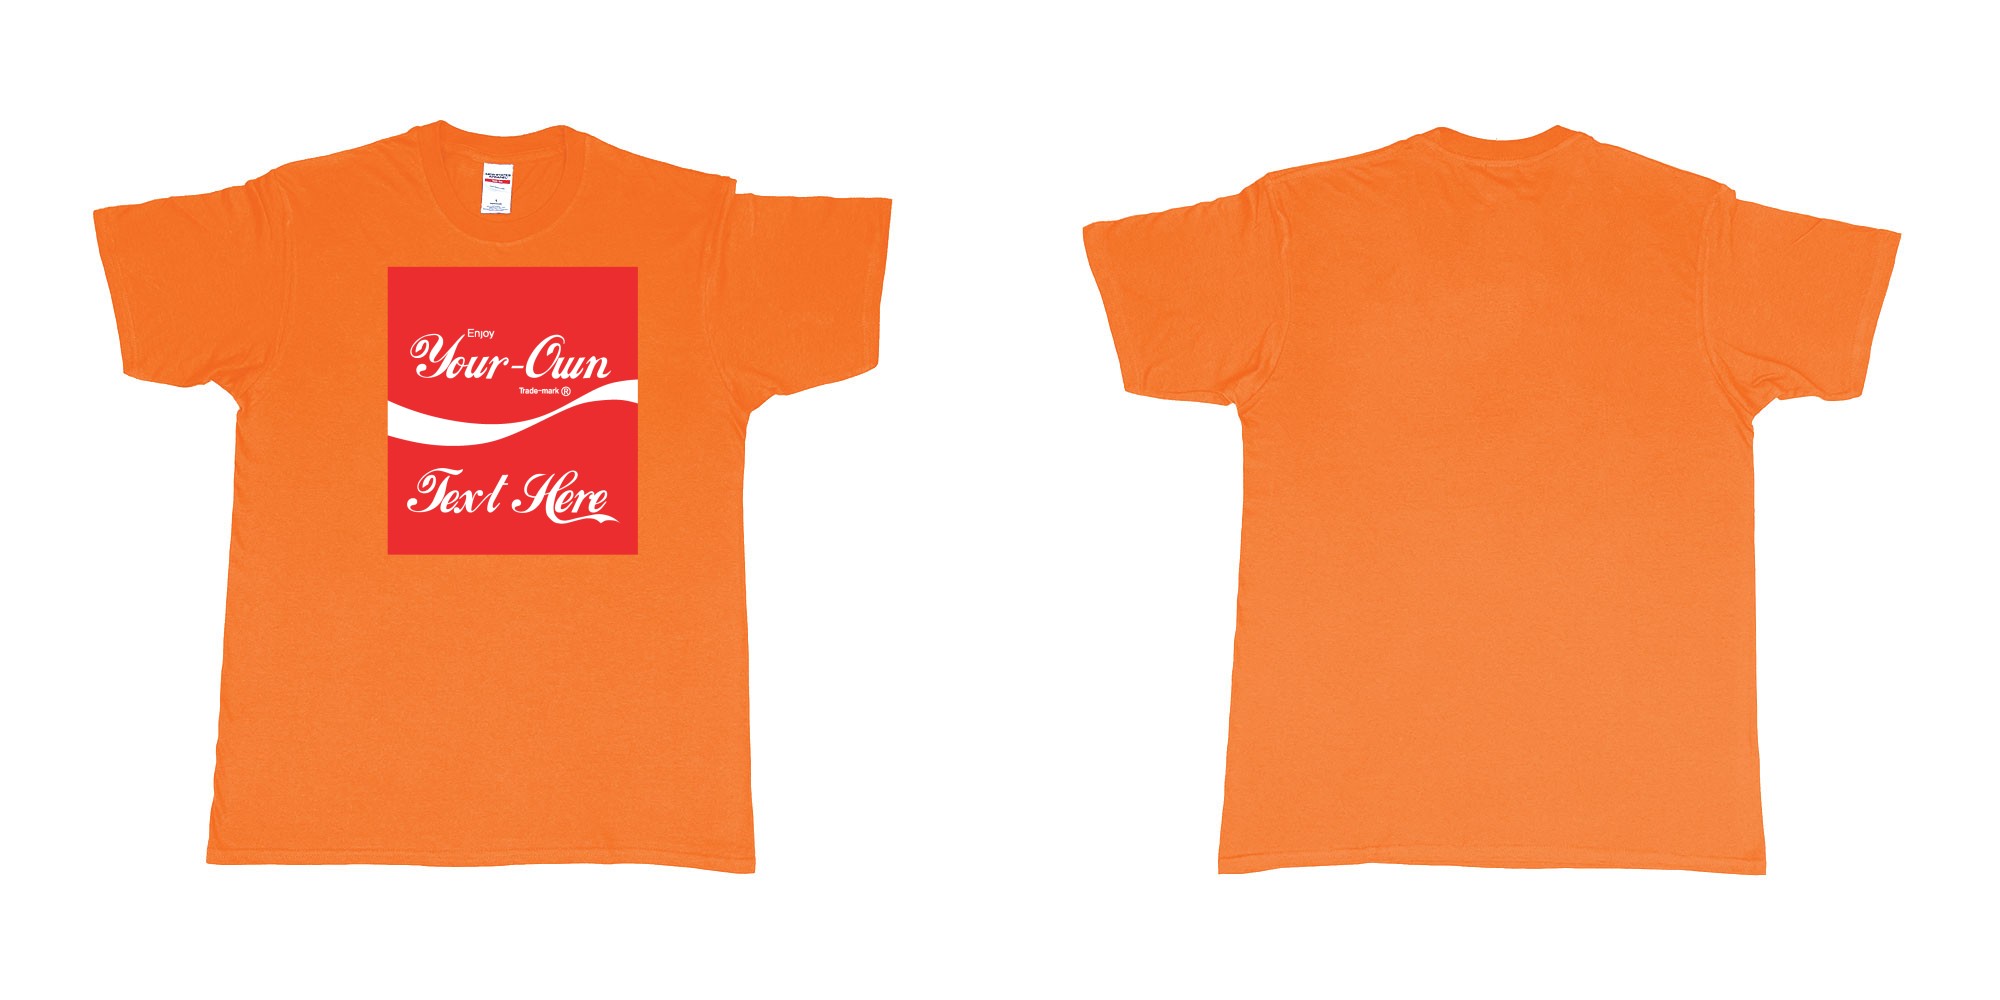 Custom tshirt design Coca Cola in fabric color orange choice your own text made in Bali by The Pirate Way